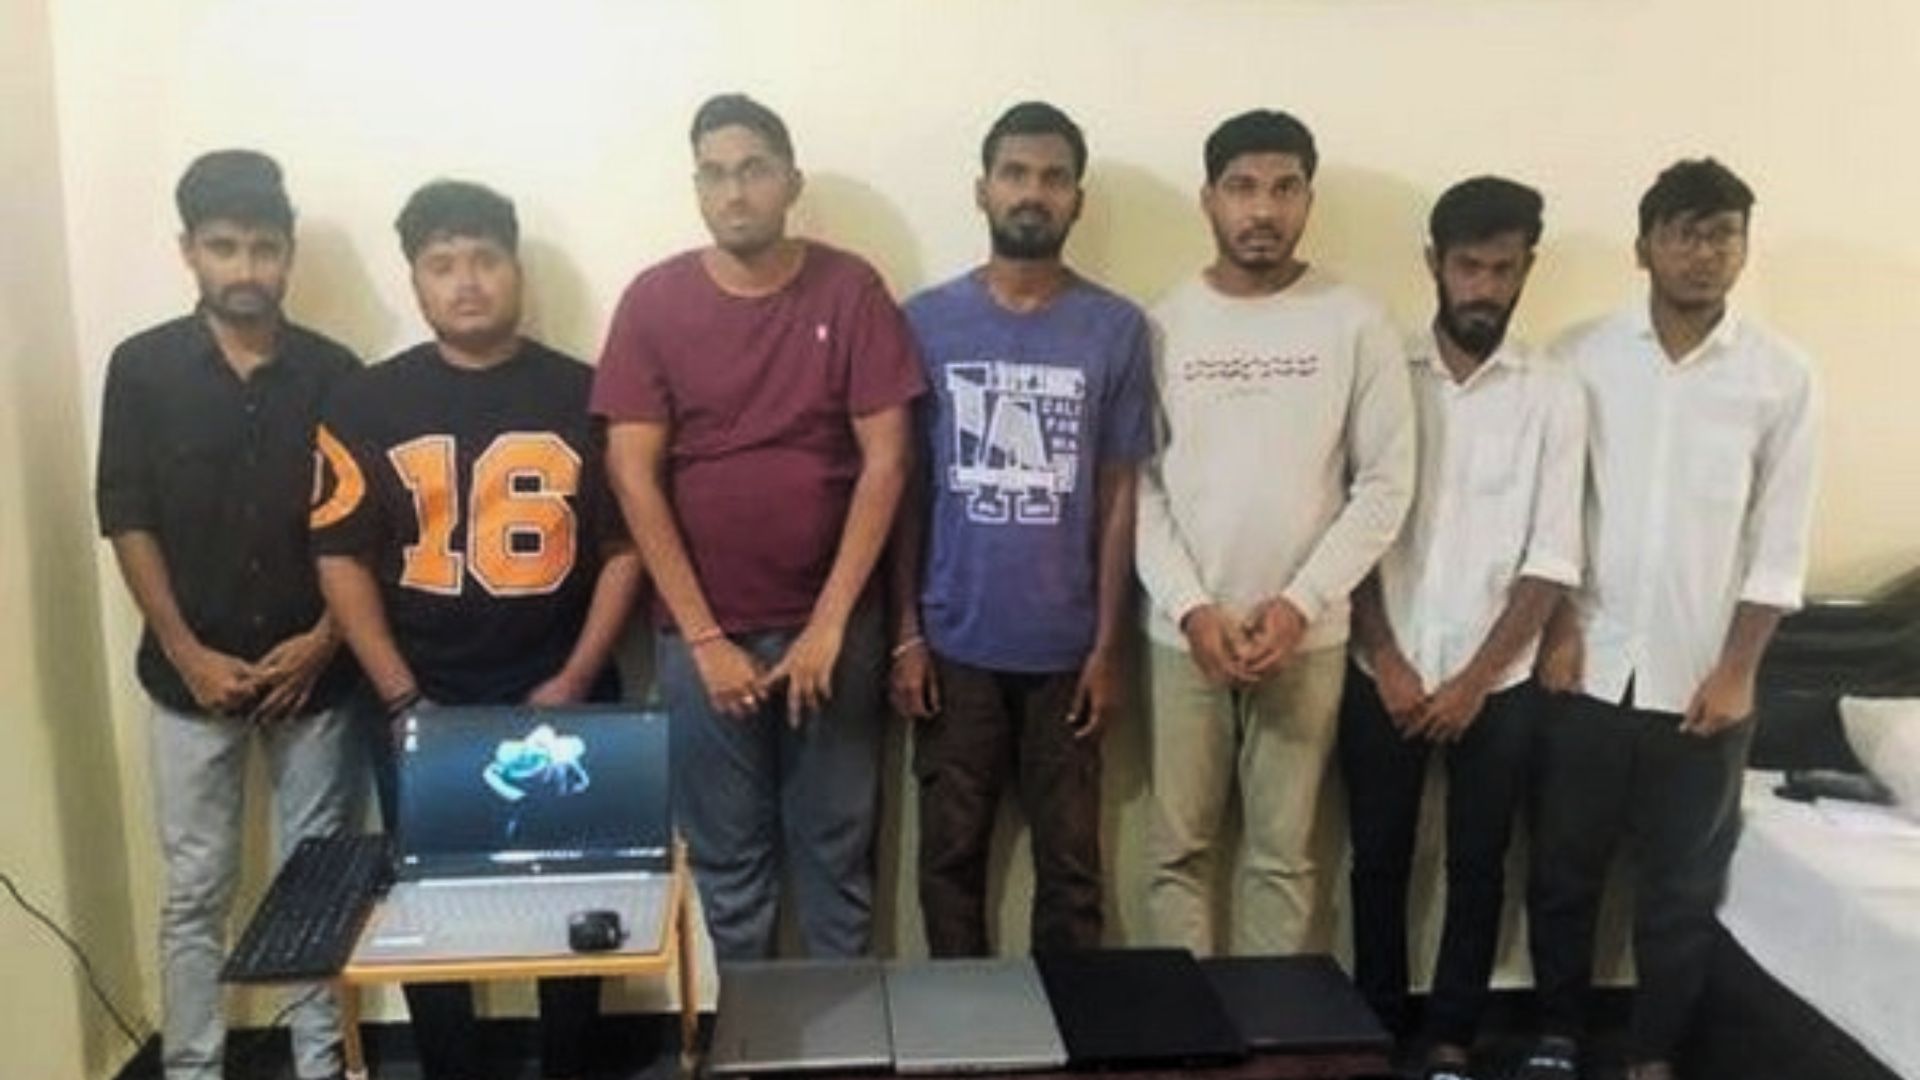 Telangana police arrest seven for impersonation in online English eligibility test to get admission to international universities